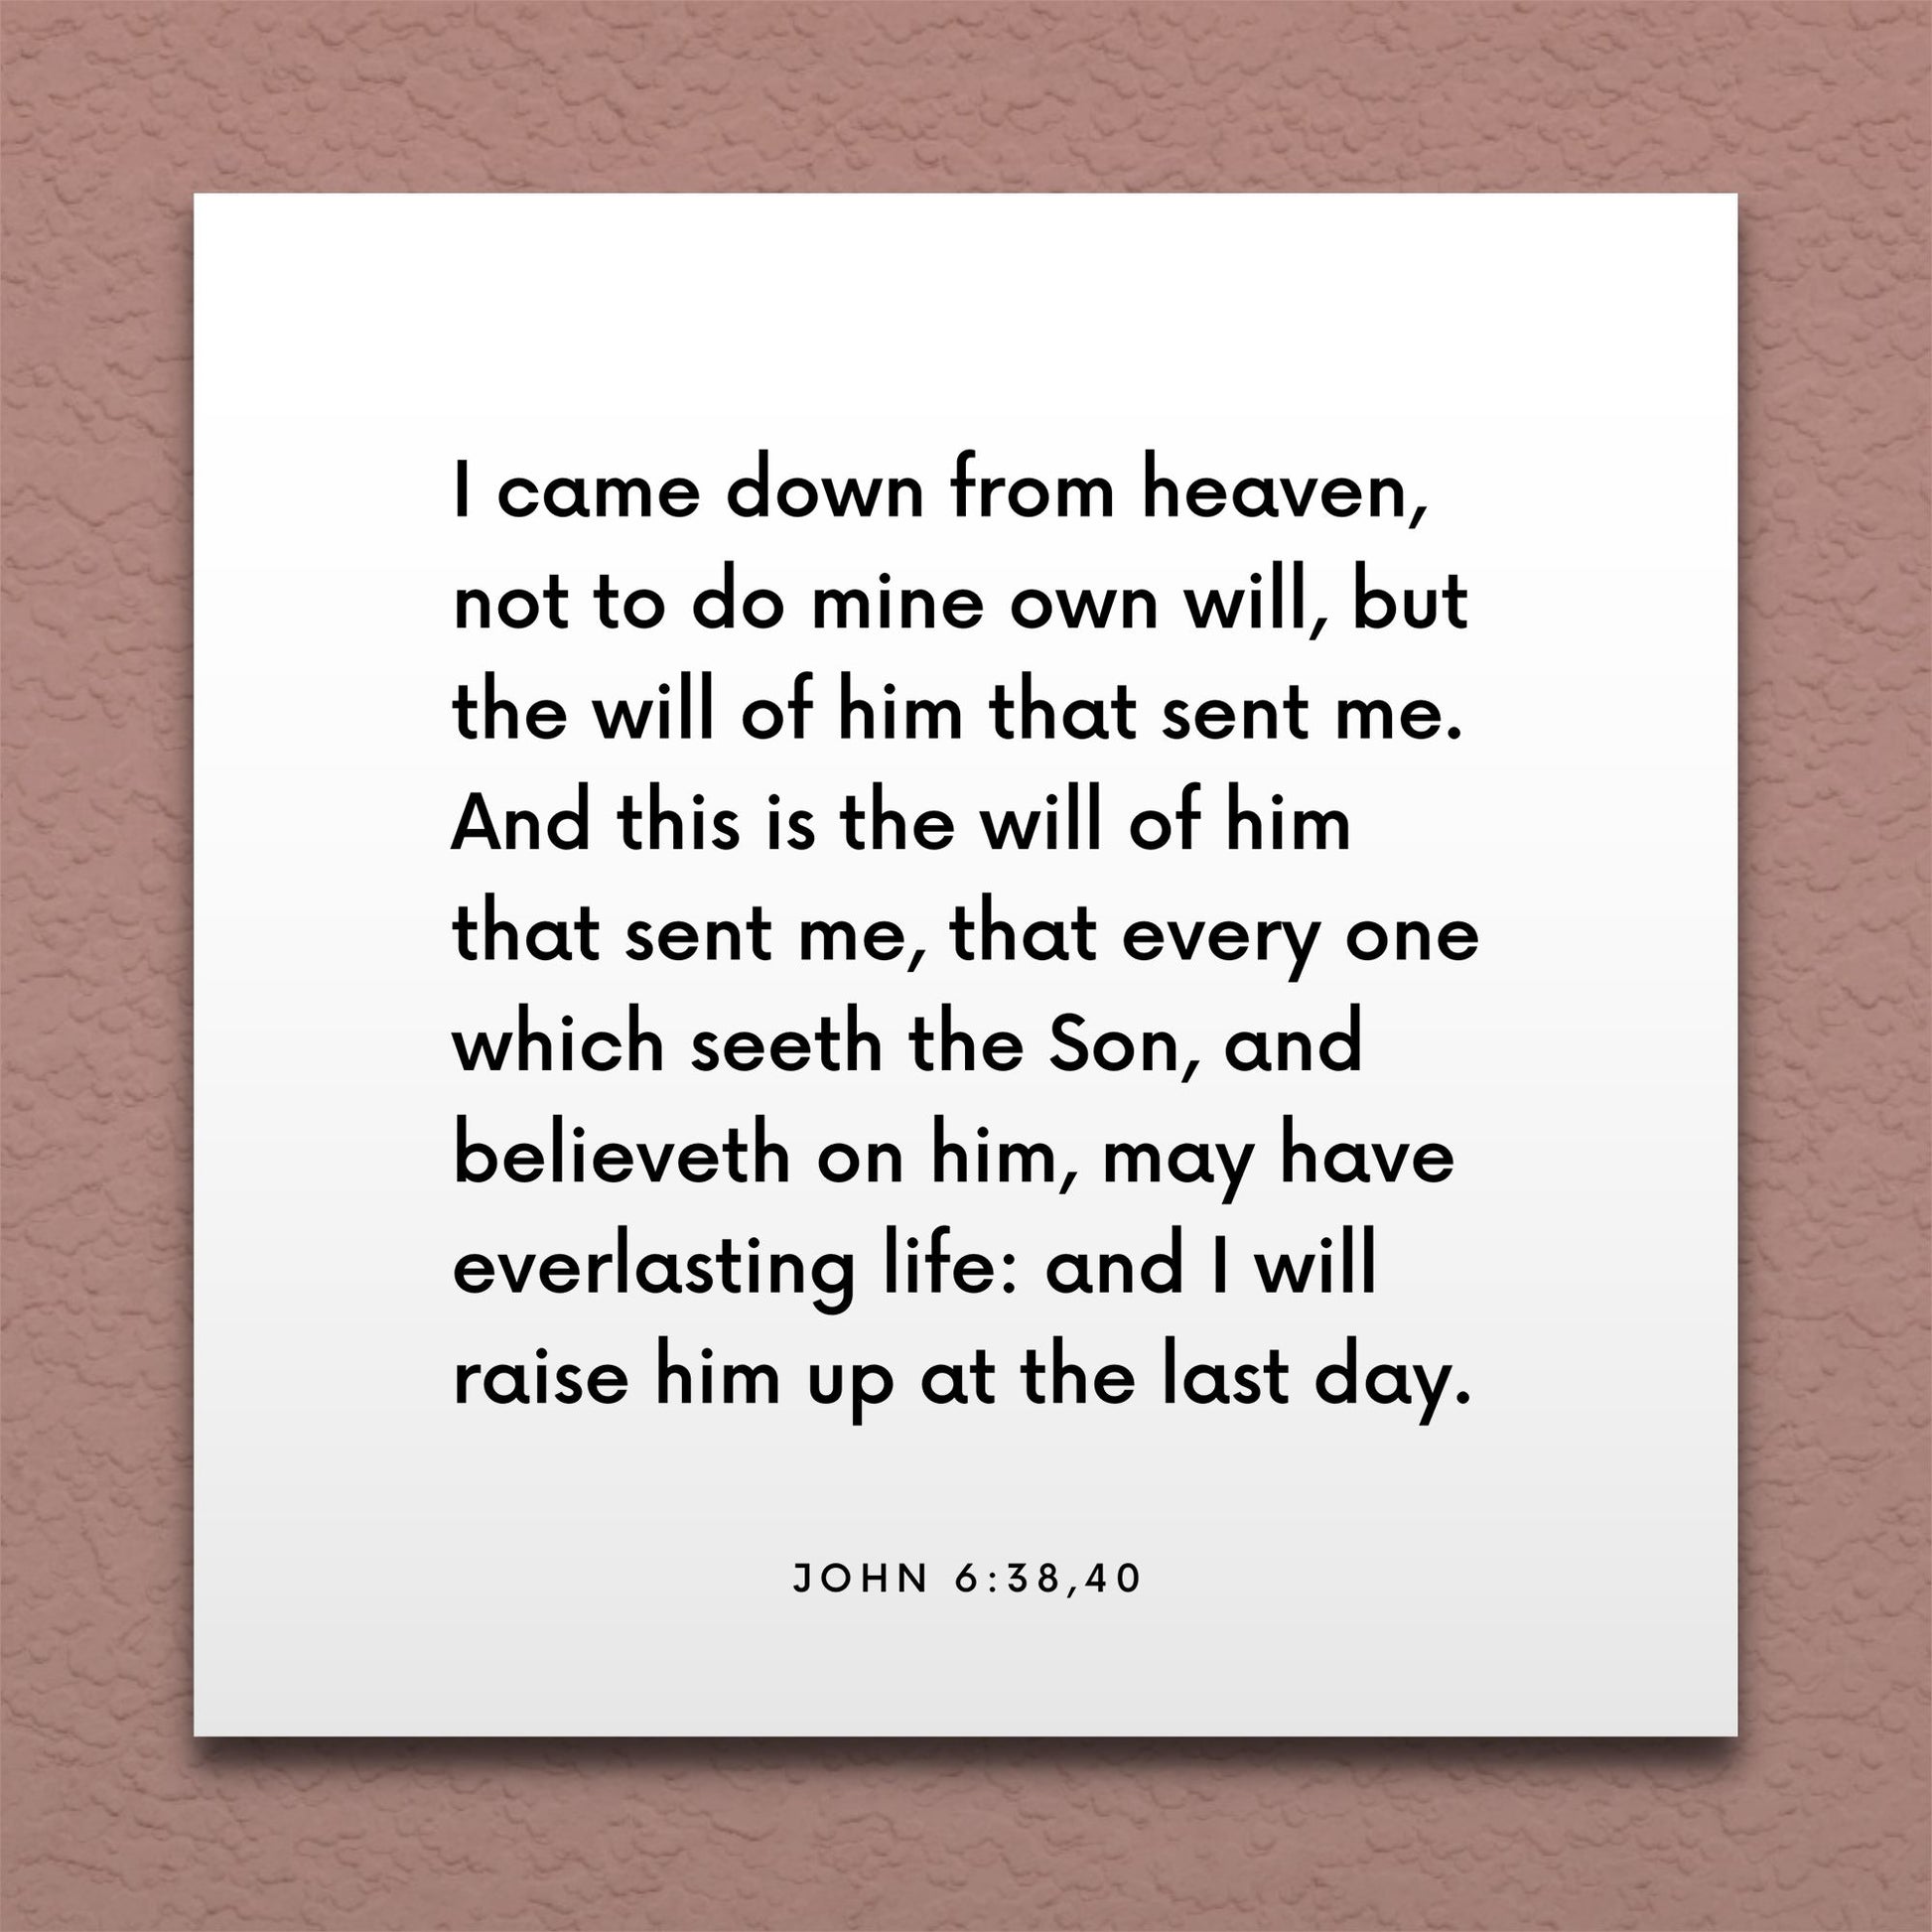 Wall-mounted scripture tile for John 6:38,40 - "I came down from heaven, not to do mine own will"